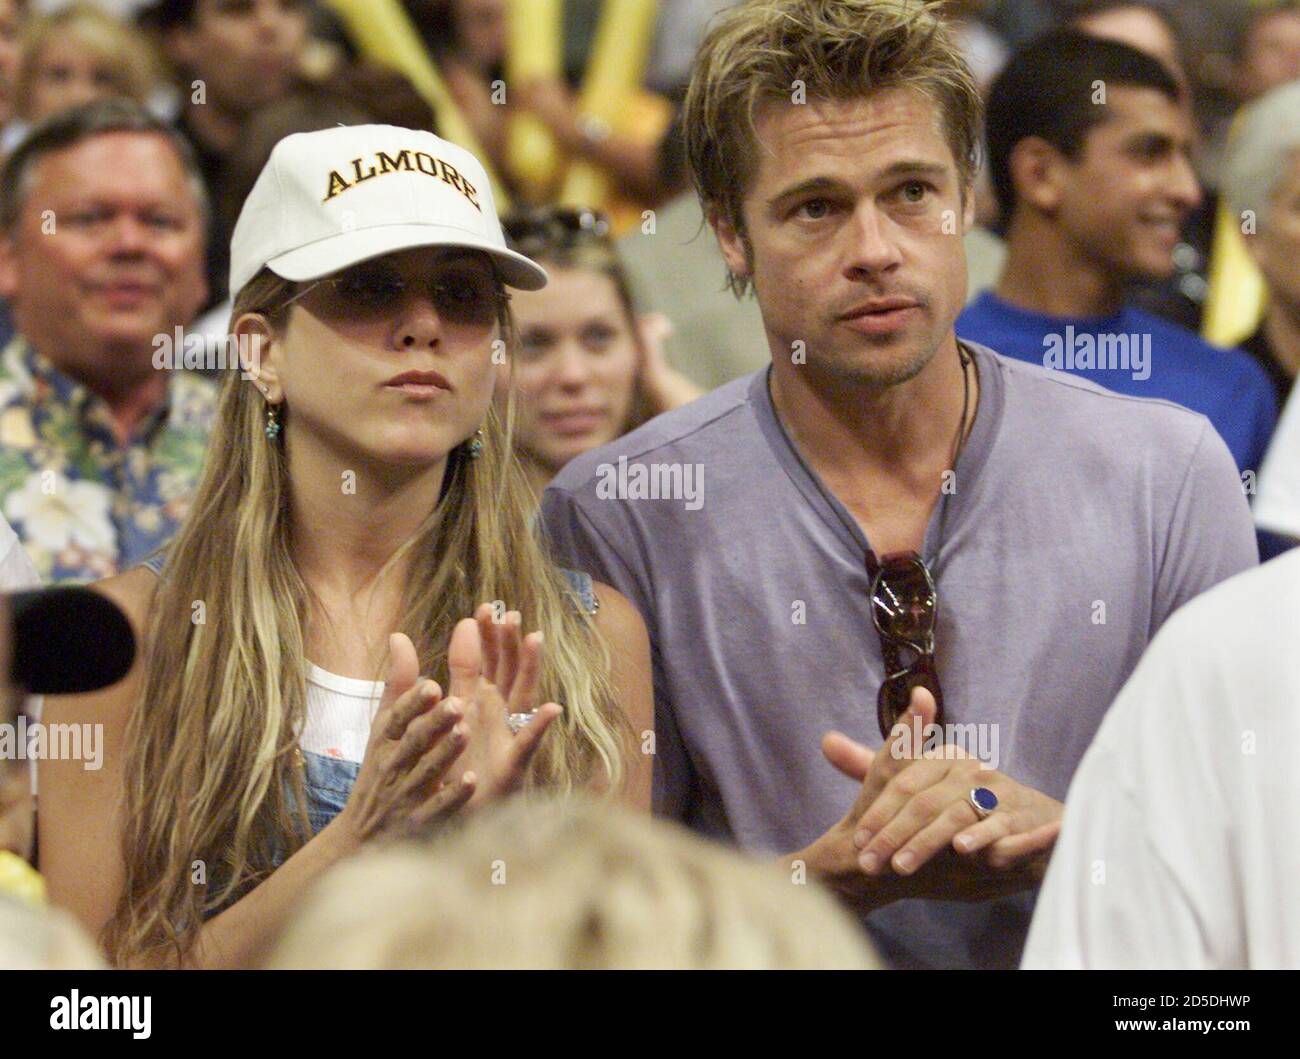 Actor Brad Pitt (R) and girlfriend Jennifer Aniston, star of the television  comedy series " Friends" watch Game 6 of the NBA Finals at the Staples  Center in Los Angeles, June 19. [